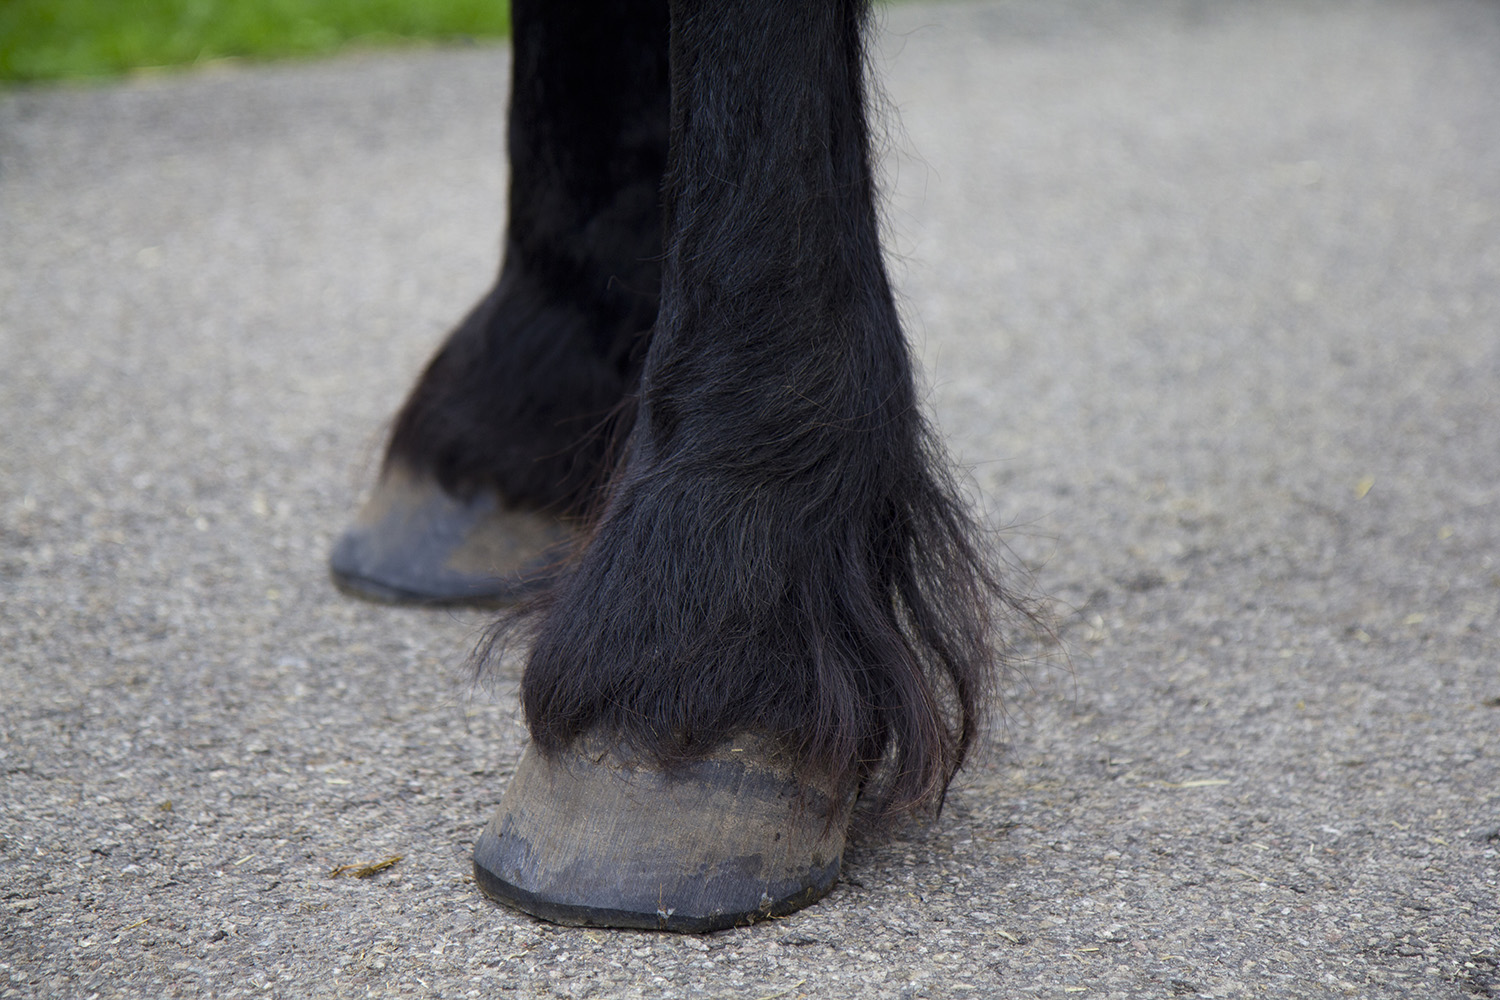 treating mites in horses effectively